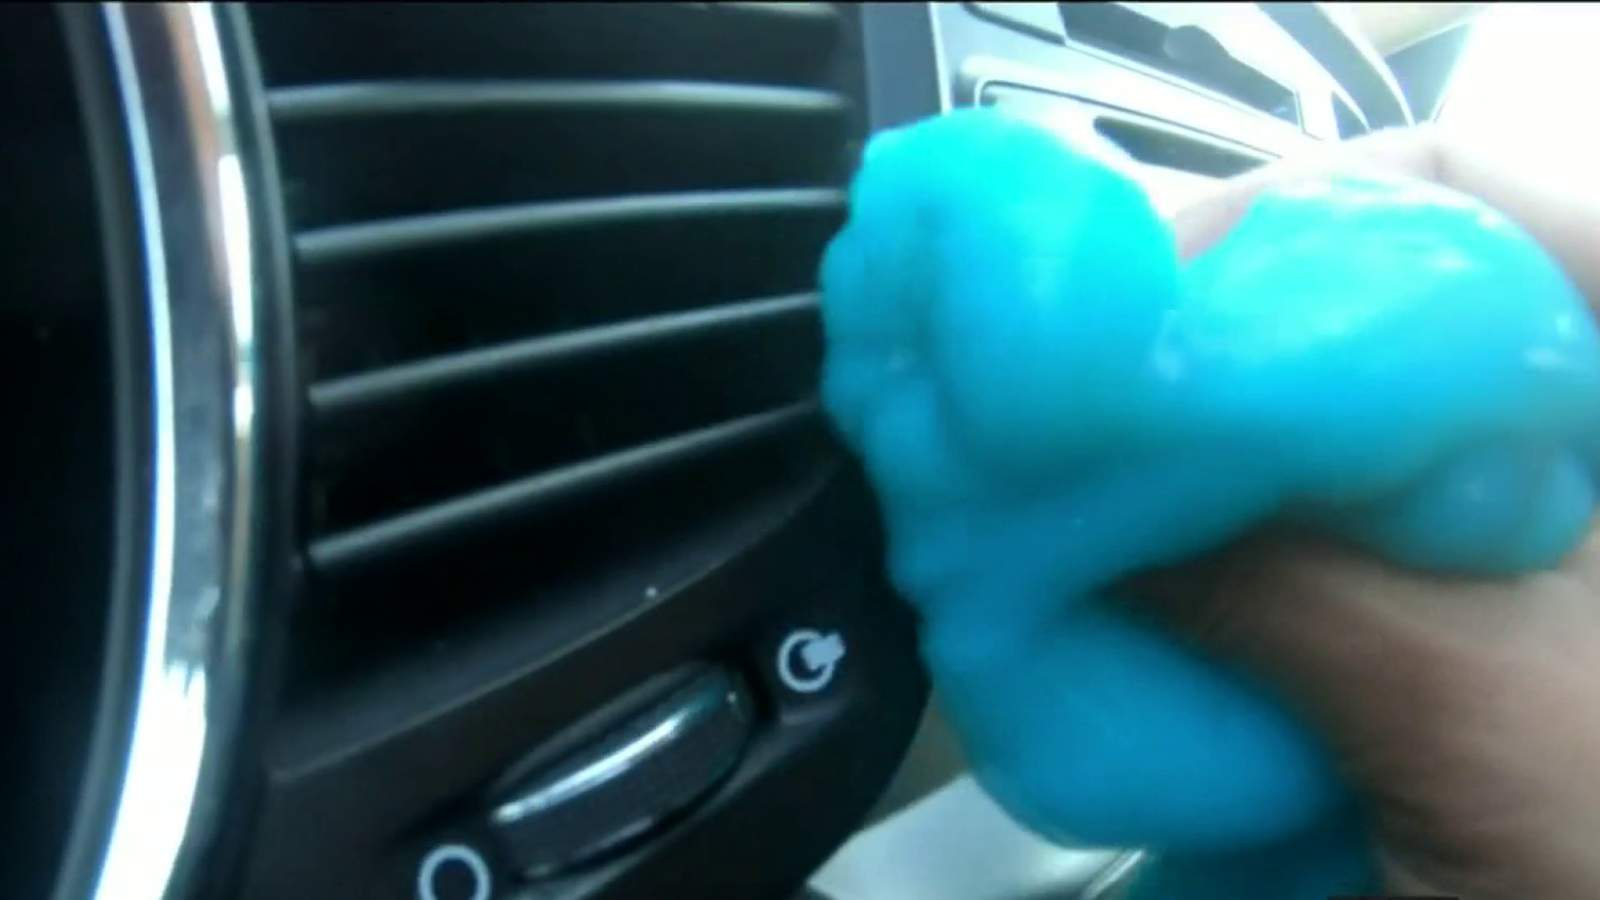 Can this cleaning gel help tidy up your car?